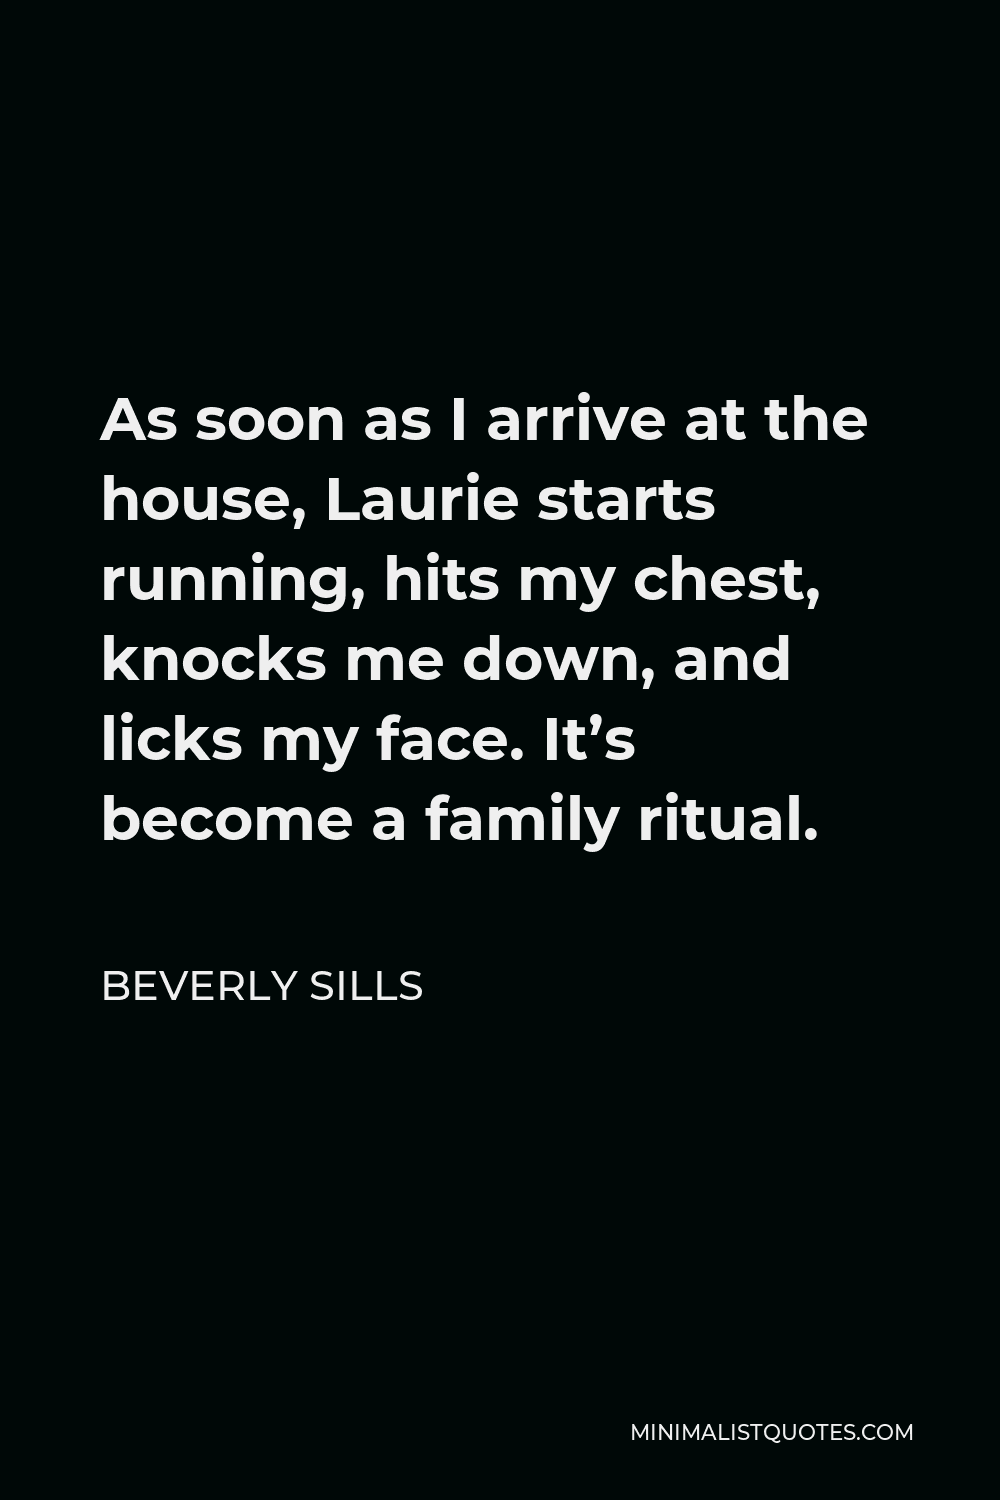 Beverly Sills Quote - As soon as I arrive at the house, Laurie starts running, hits my chest, knocks me down, and licks my face. It’s become a family ritual.